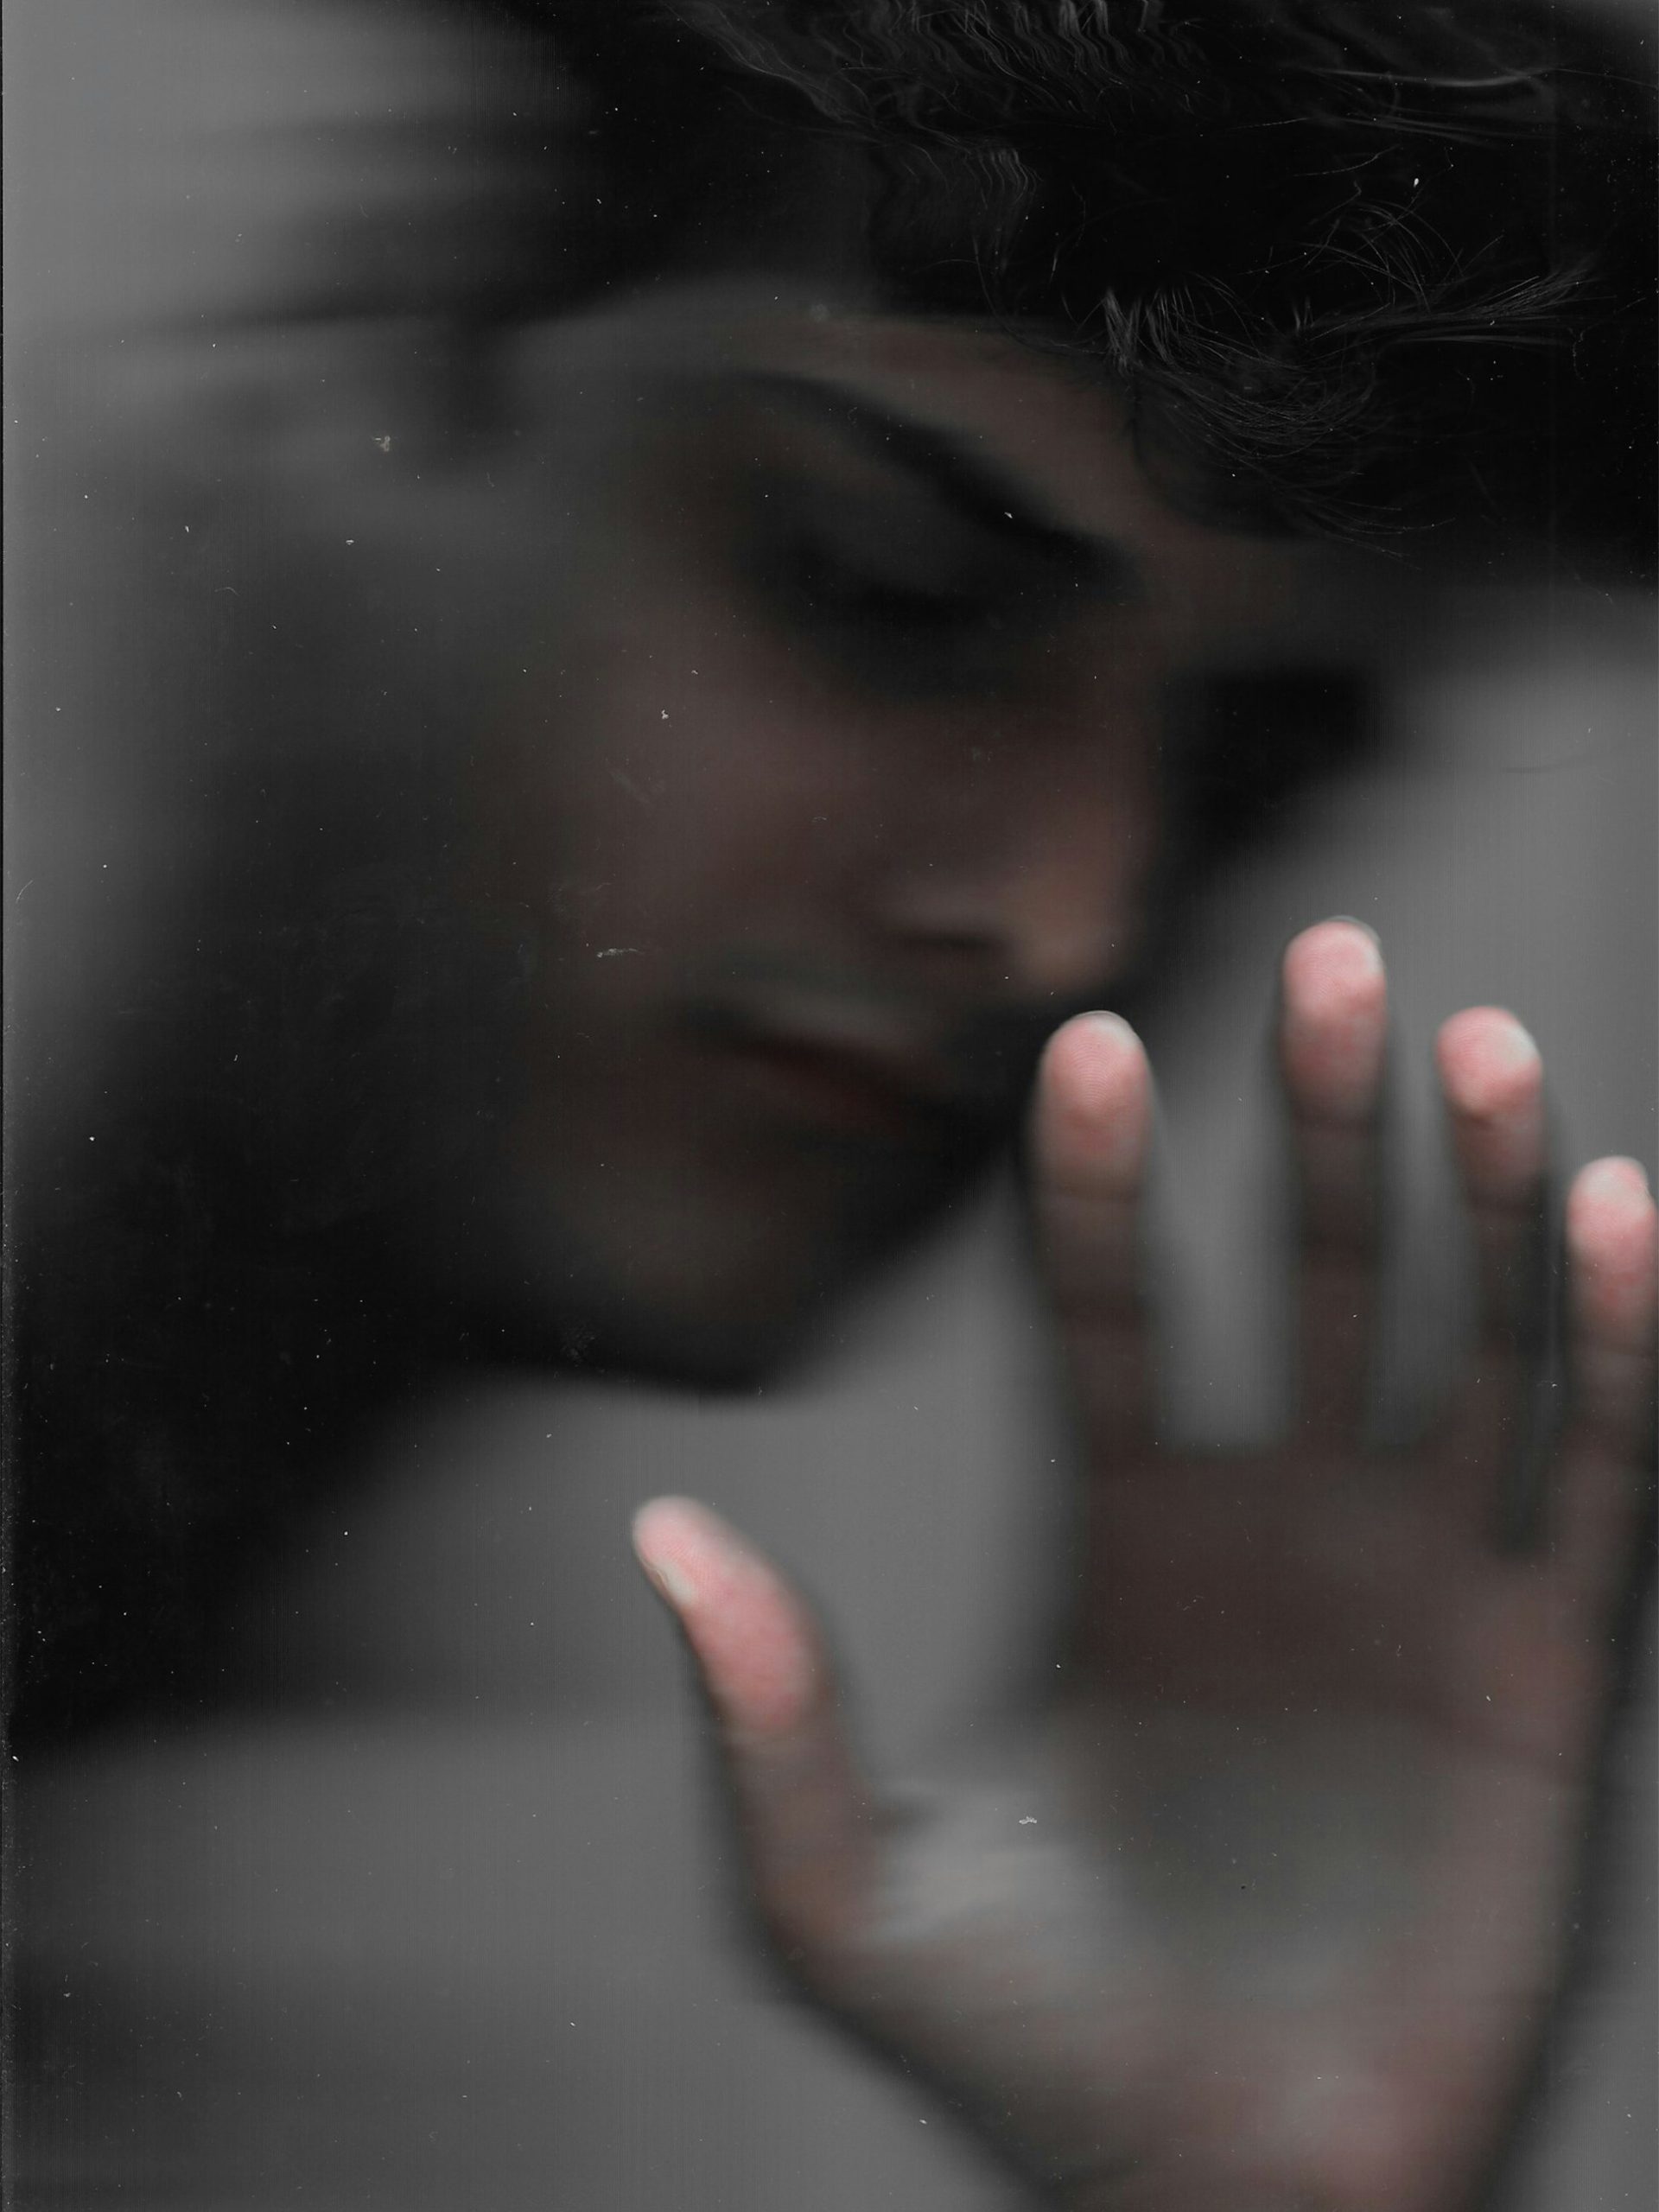 Blurred image of man with hand against window